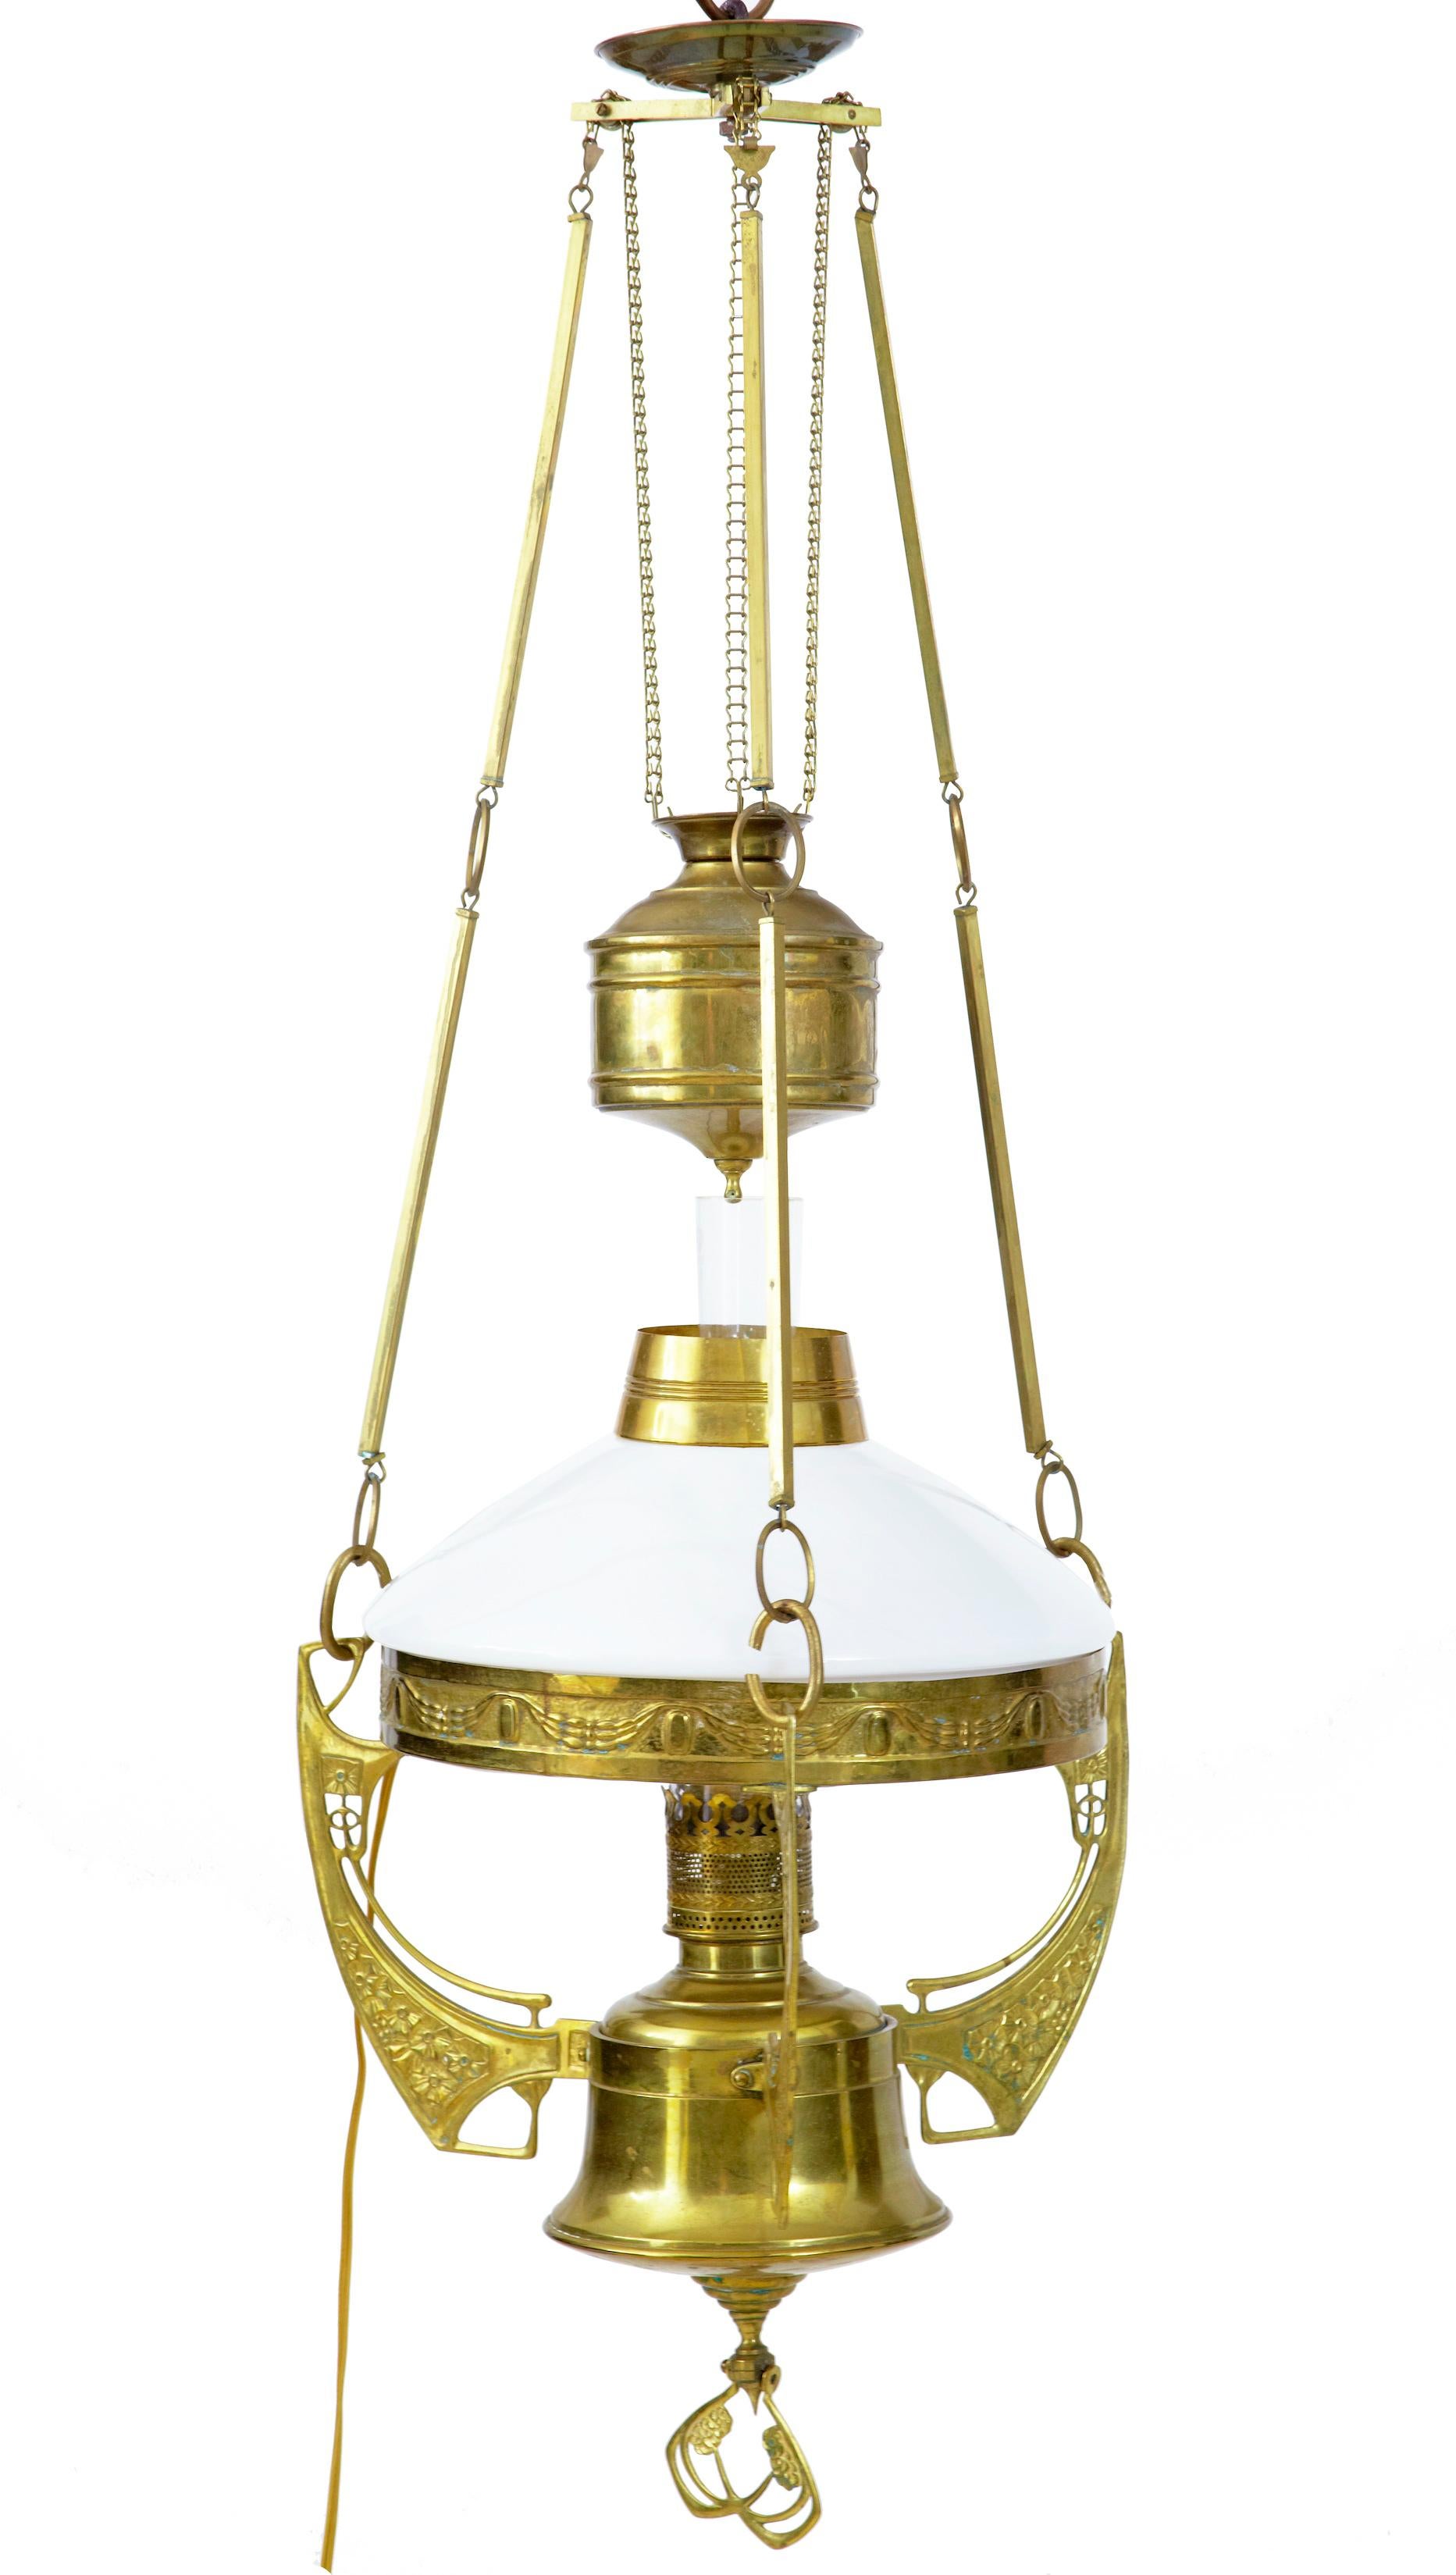 Late 19th century arts and crafts brass adjustable hanging lamp circa 1890.

Good quality pressed brass lamp with typical art and craft patterns.  Oil lamp with all its components intact, later fitted with 3 electric bulb holders. Height